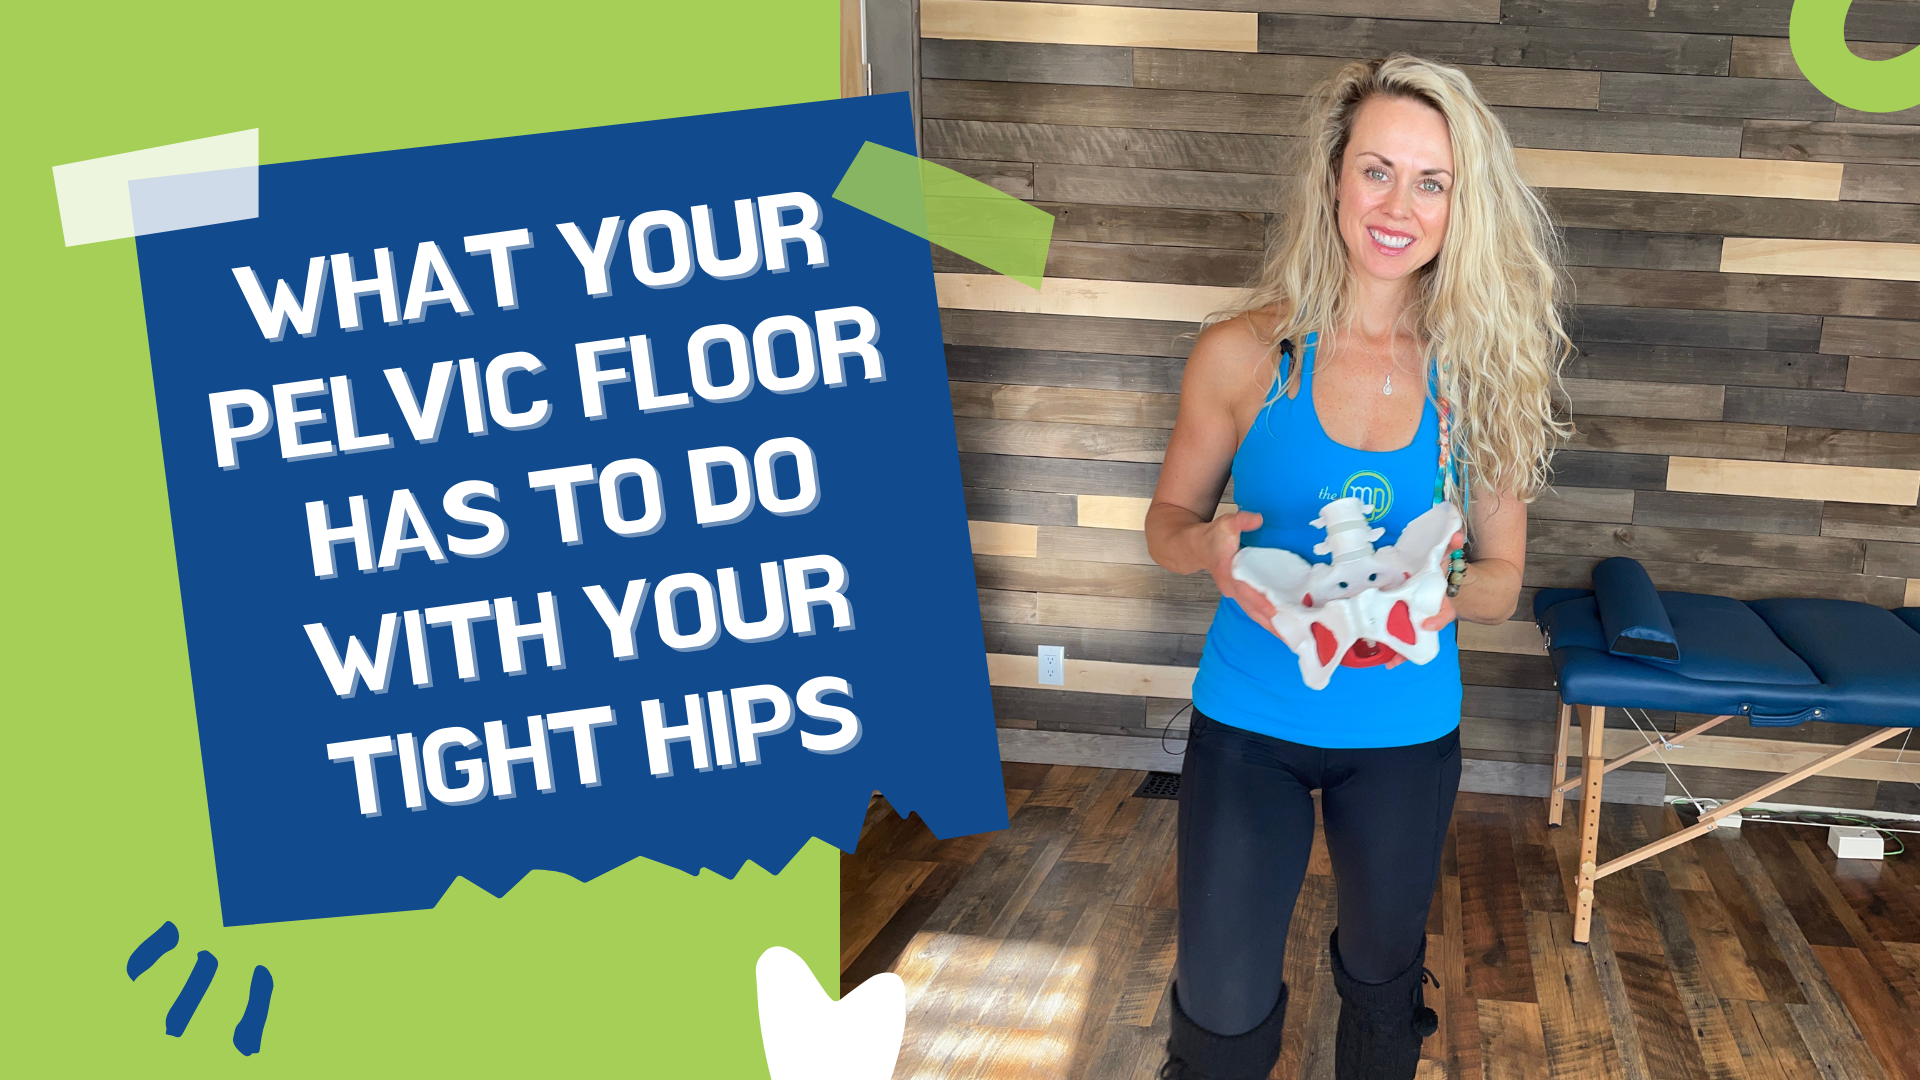 What your pelvic floor has to do with your tight hips